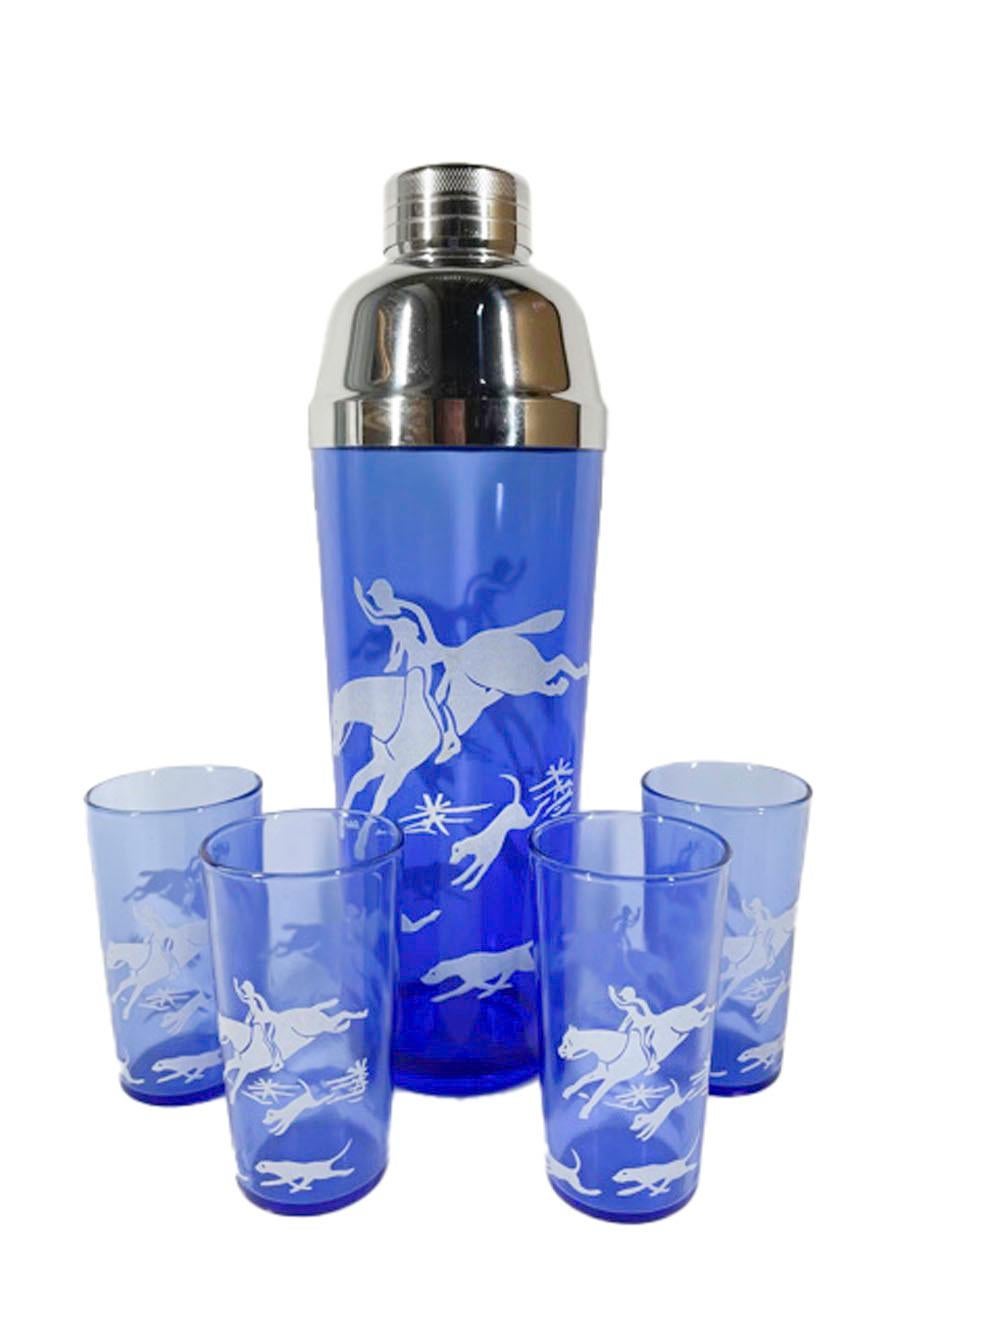 Art Deco Hazel-Atlas cocktail shaker and four tumblers in cobalt glass with white transfer fox hunt scene. The shakers high domed chrome central pour lid with integral strainer.